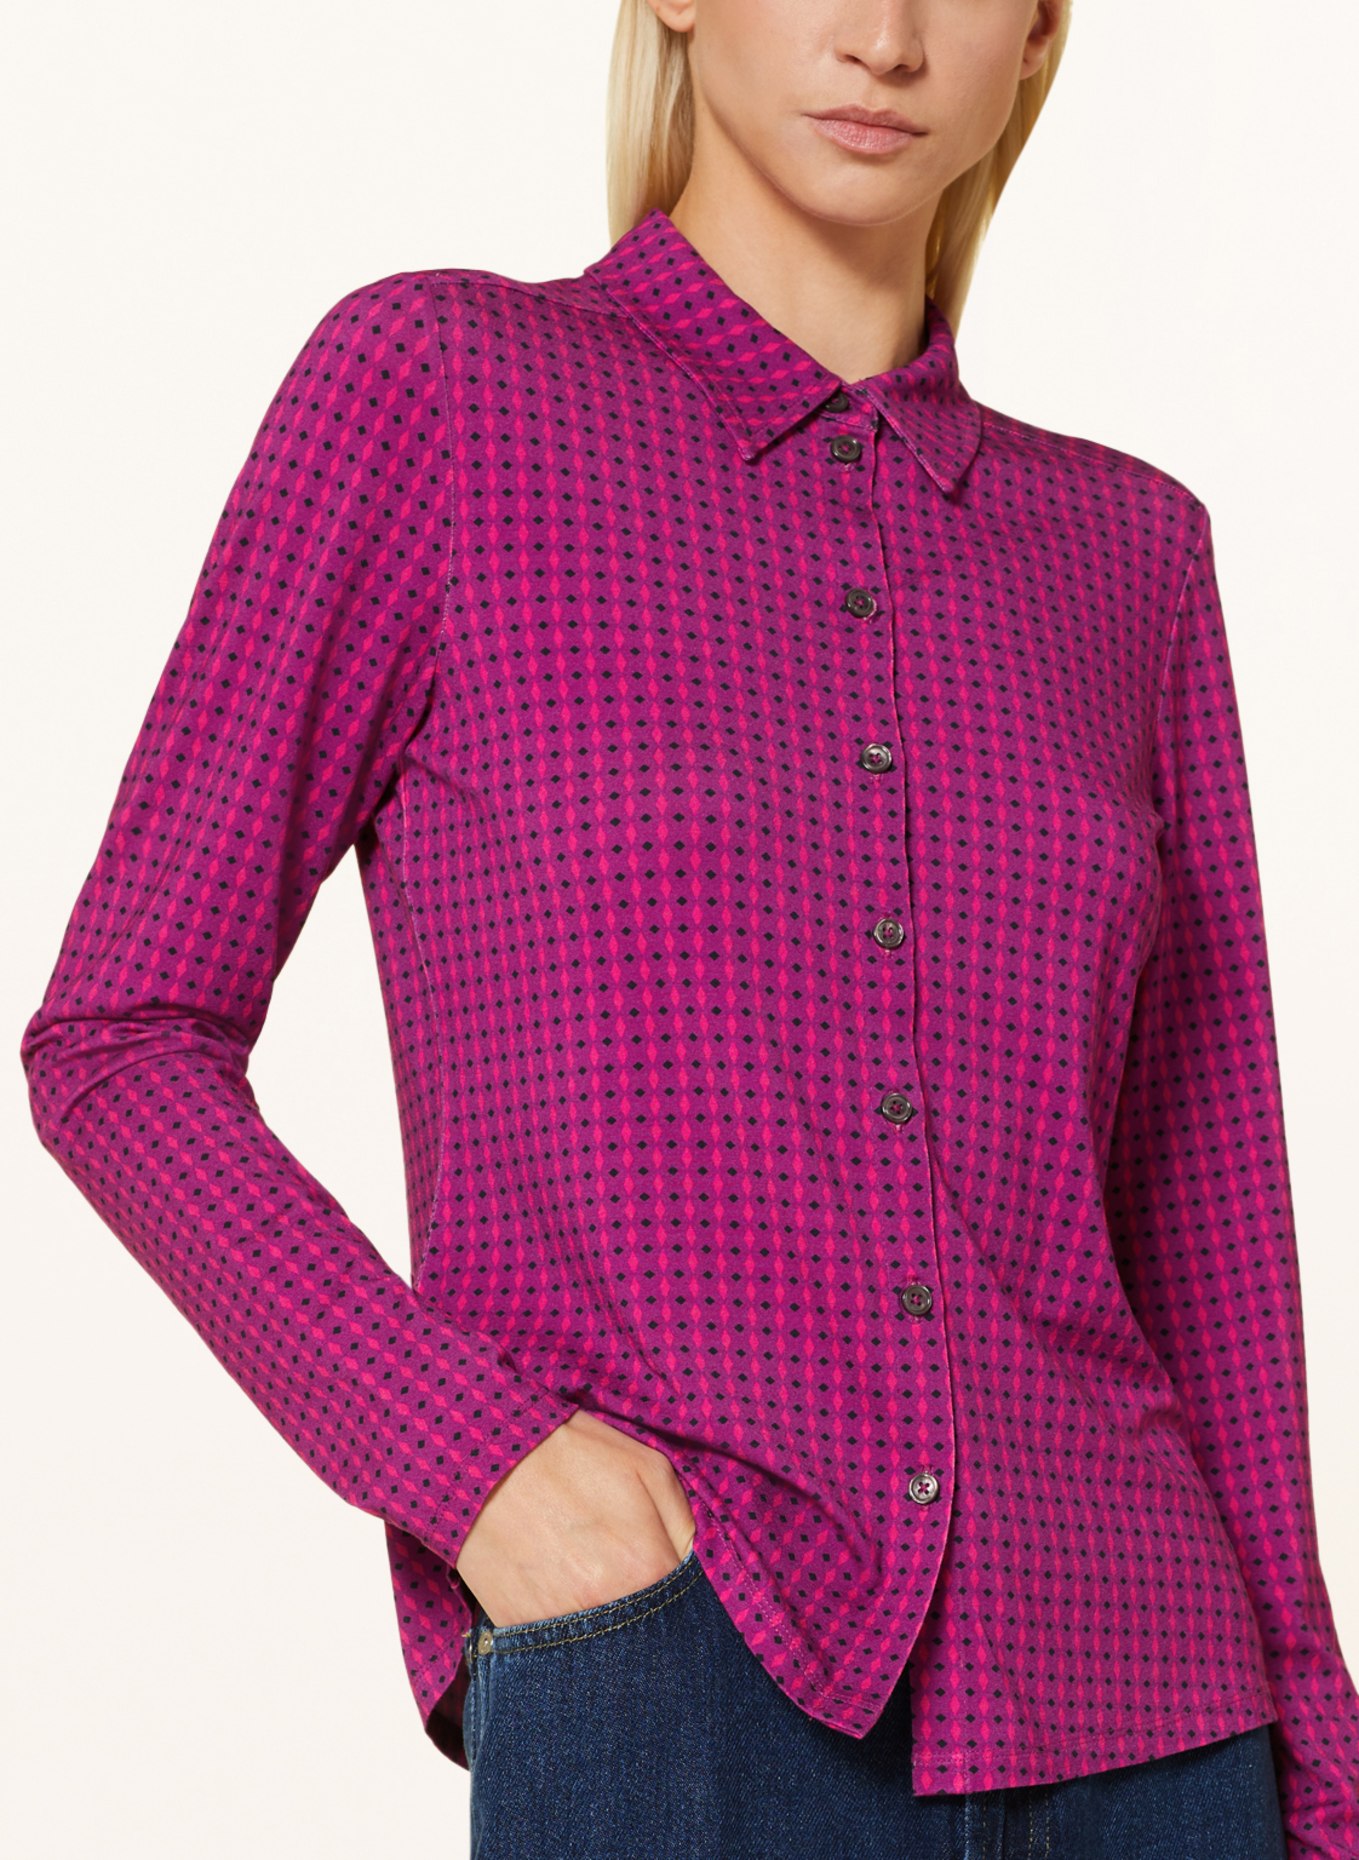 Marc O'Polo Shirt blouse made of jersey, Color: PINK/ BLACK/ FUCHSIA (Image 4)